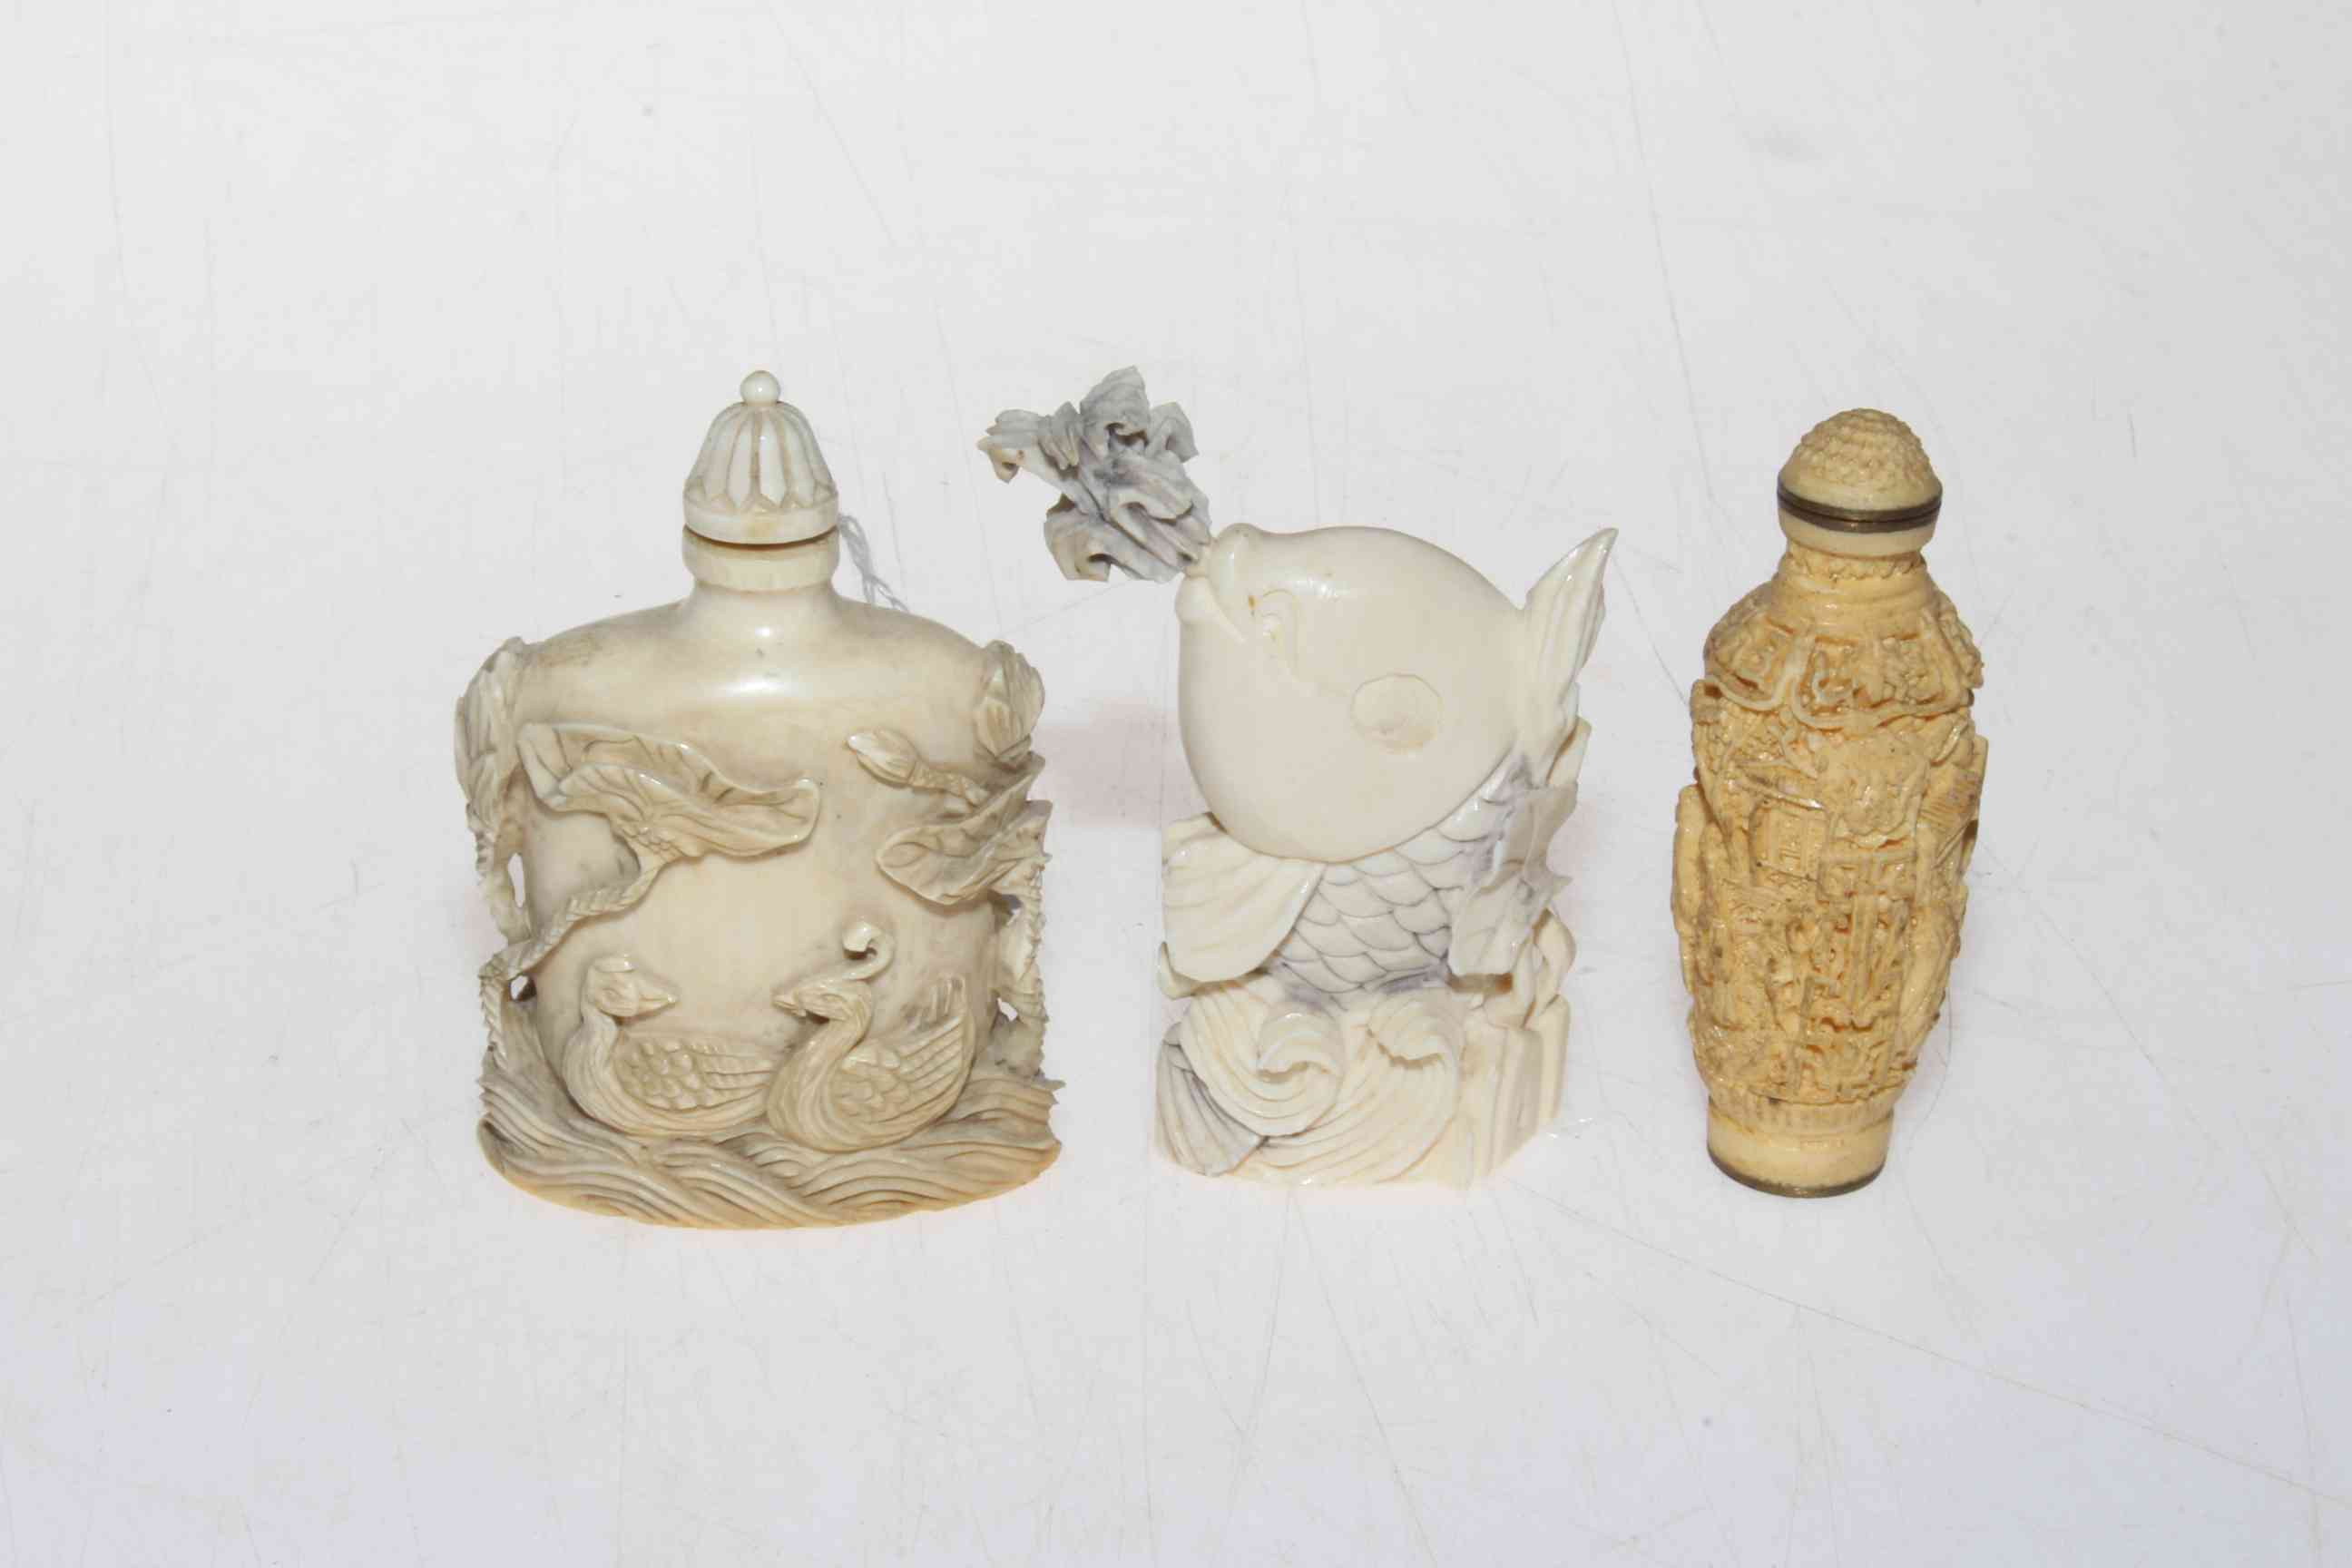 Three ivory/bone scent bottles, each approximately 8cm, all with base signature or mark.